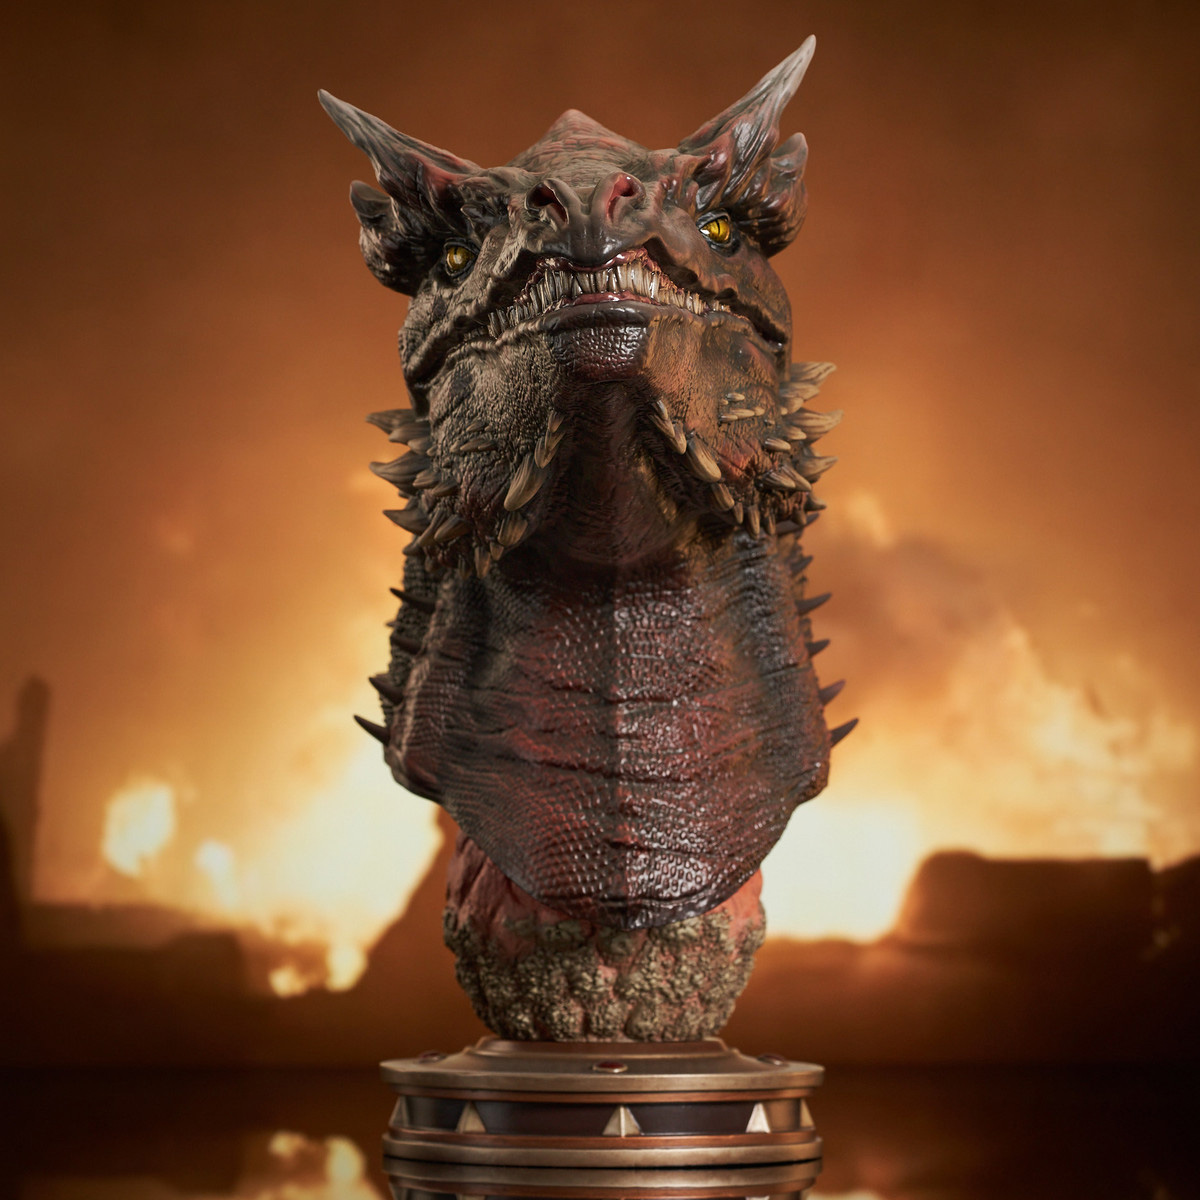 Bust Caraxes Legends in 3D, the Dragon of Daemon Targaryen in House of the Dragon